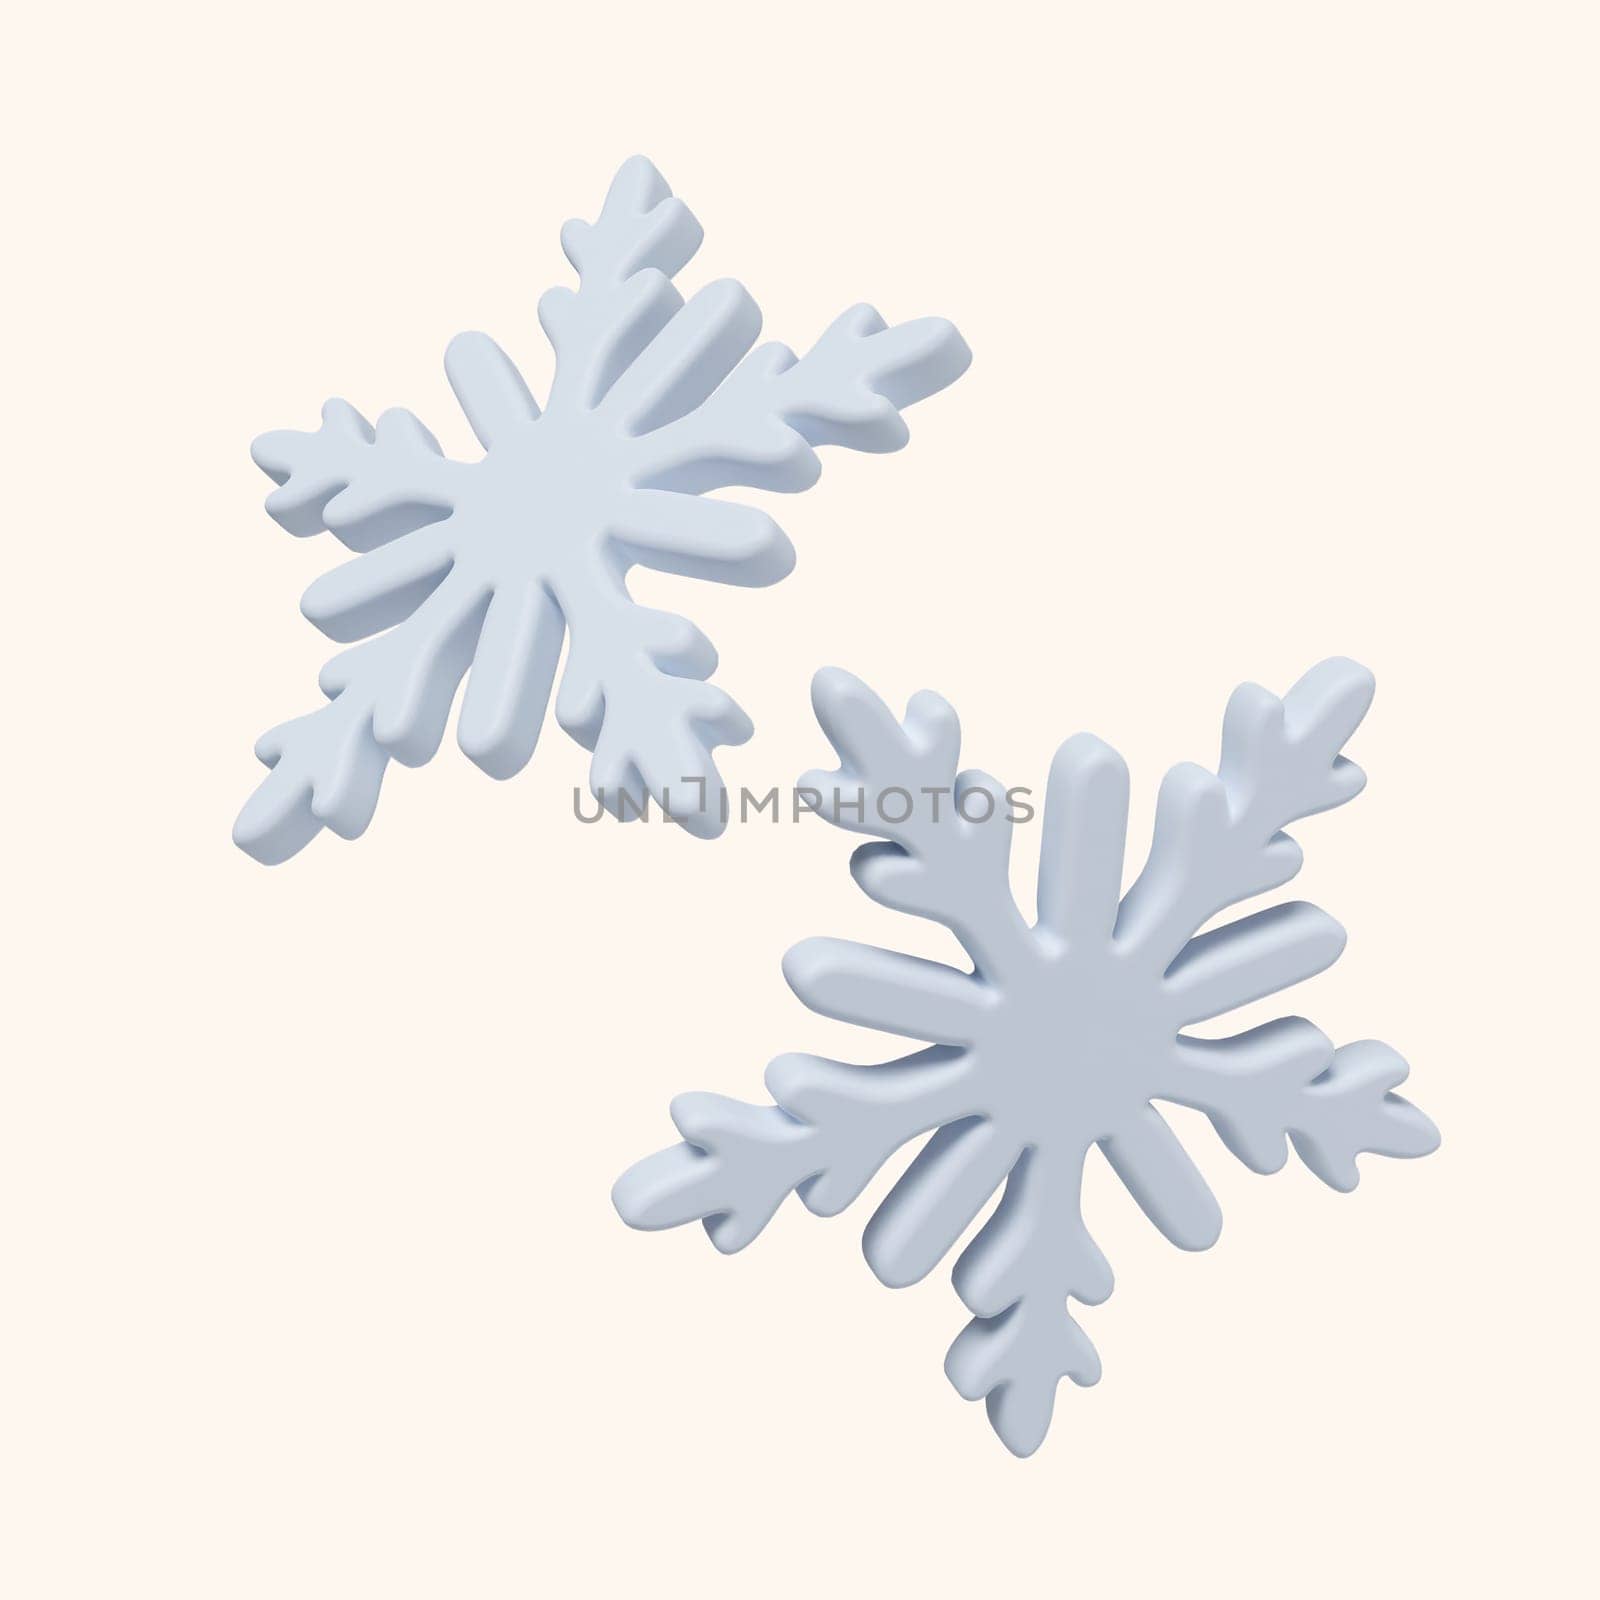 3d Christmas snowflake icon. minimal decorative festive conical shape tree. New Year's holiday decor. 3d design element In cartoon style. Icon isolated on white background. 3D illustration by meepiangraphic